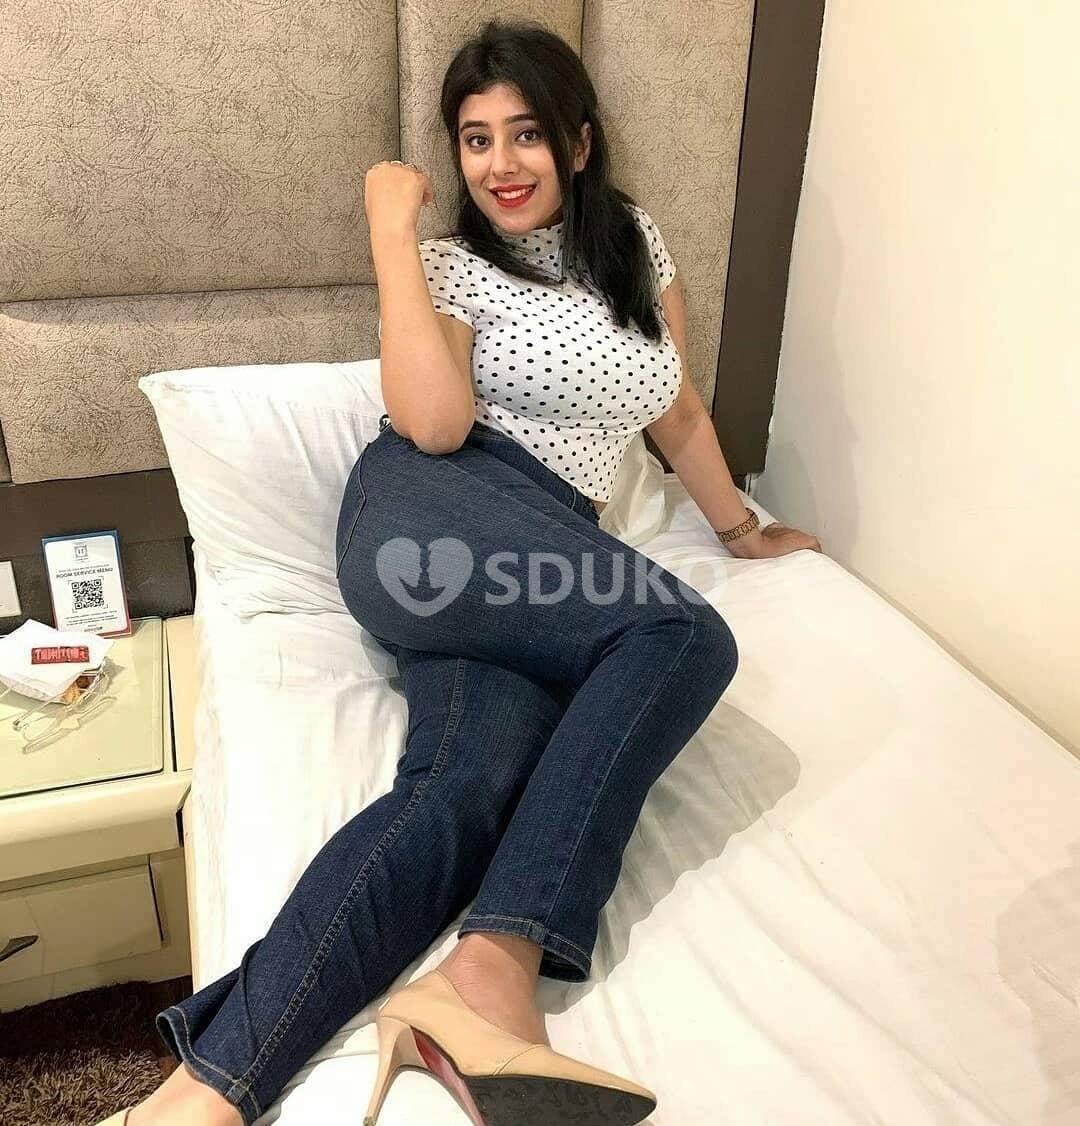 ❣️ SARJAPUR MY SELF JAYA BEST VIP INDEPENDENT HOT COLLAGE GIRL AVAILABLE